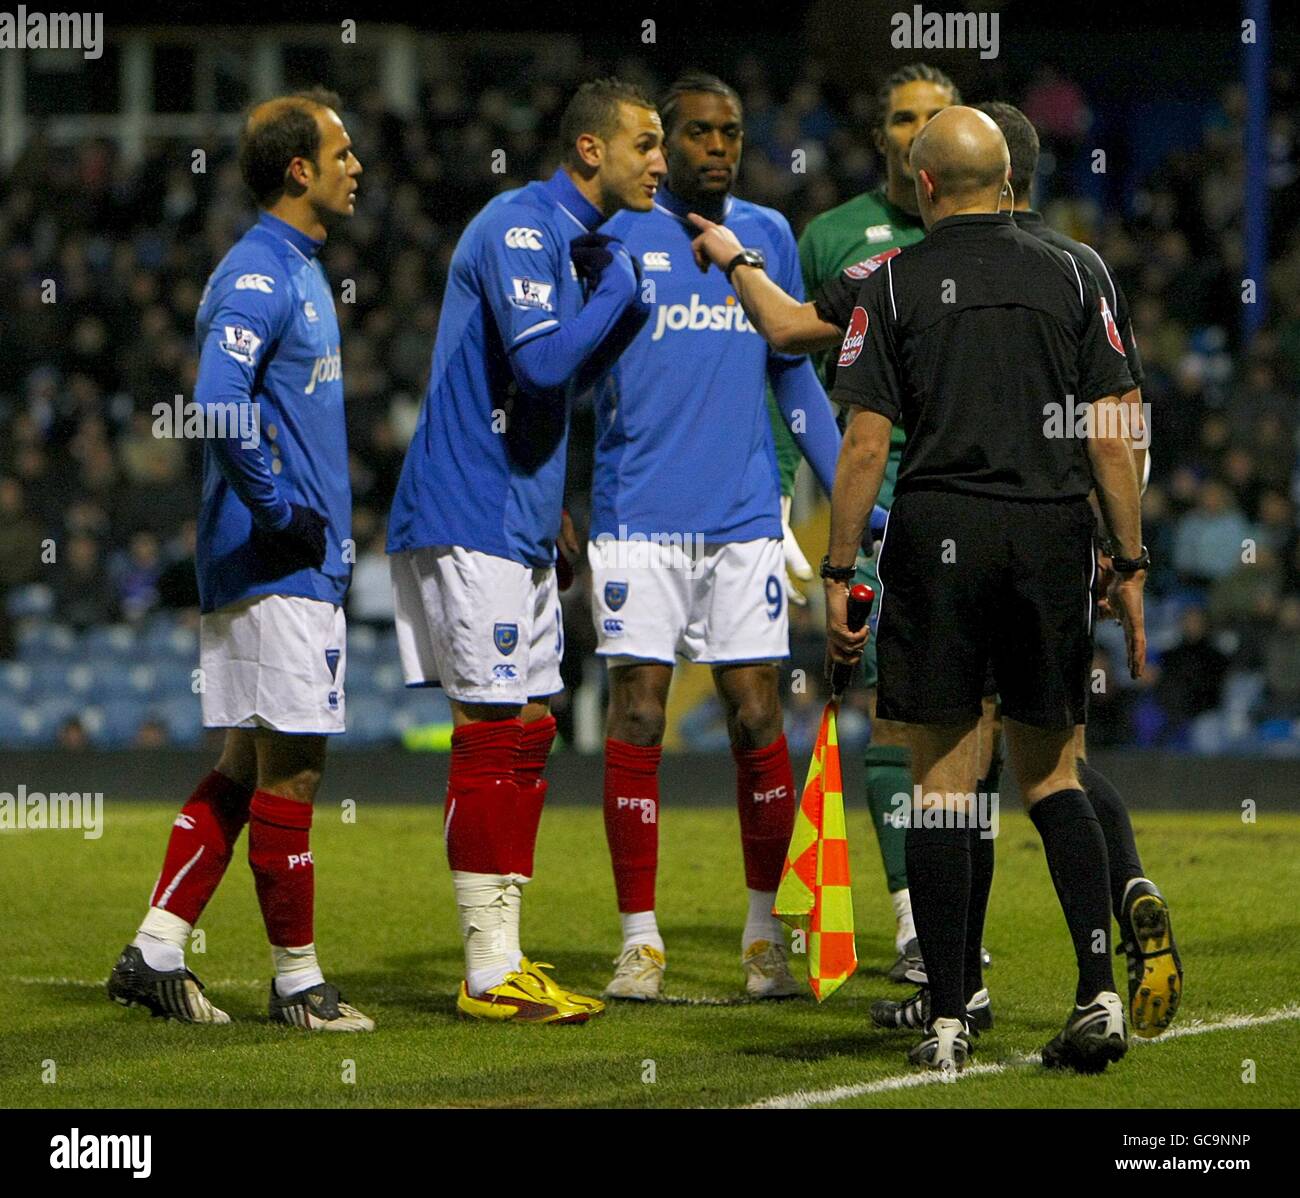 Soccer - Barclays Premier League - Portsmouth v Sunderland - Fratton Park. Portsmouth's Hassan Yebda (2nd left) argues with the officials on the touchline after he is shown a red card Stock Photo